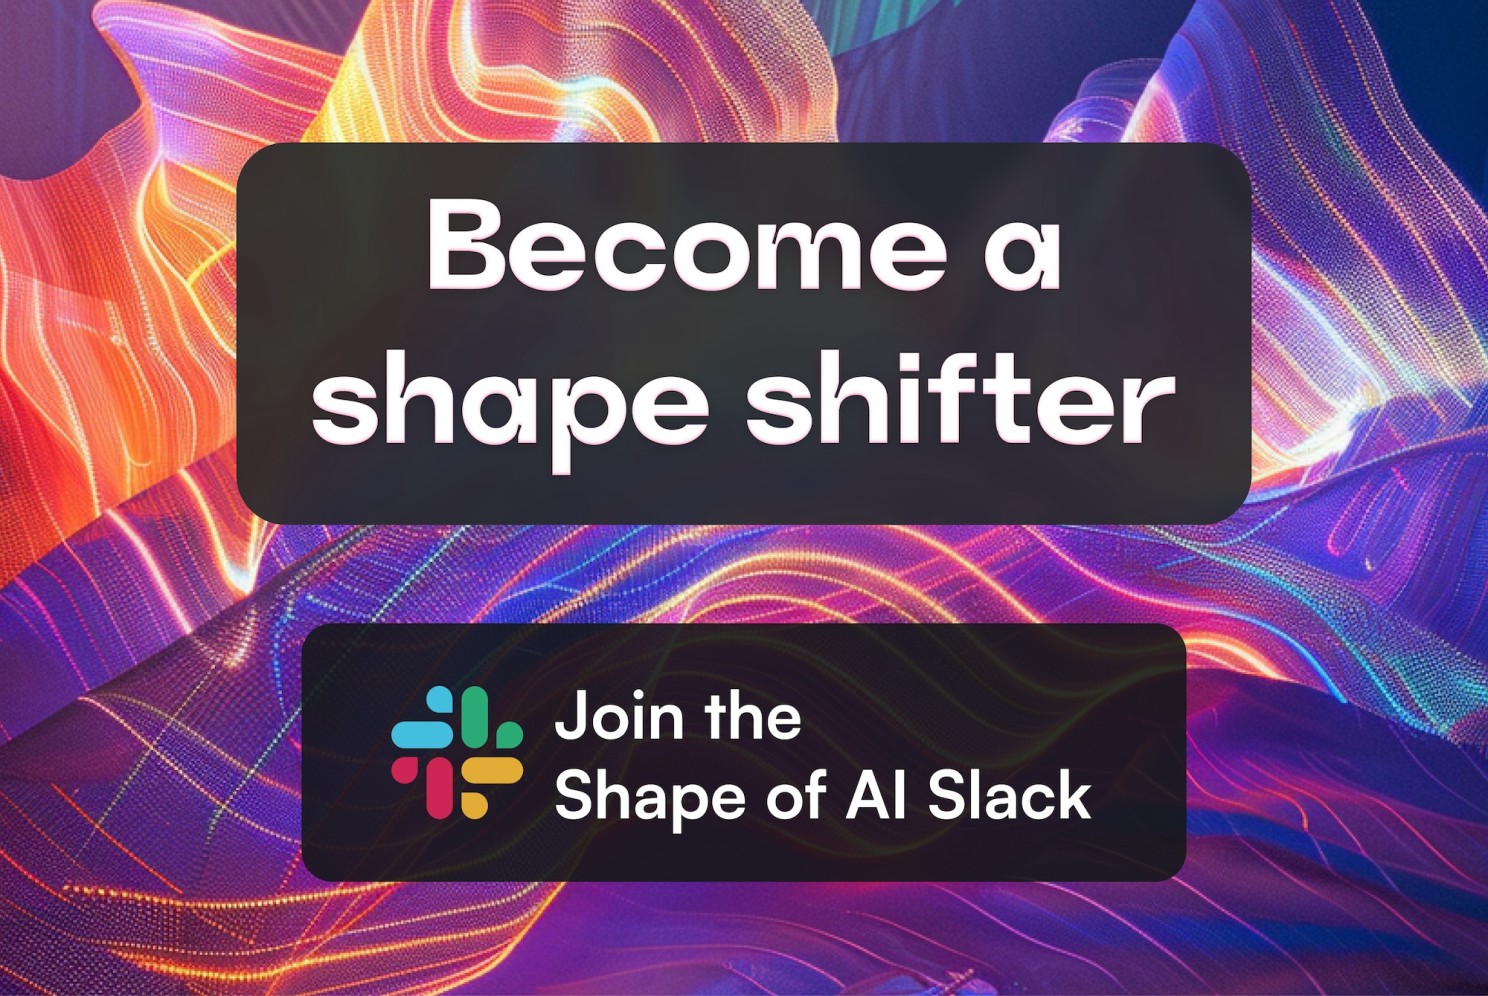 Image prompting you to join the Slack channel